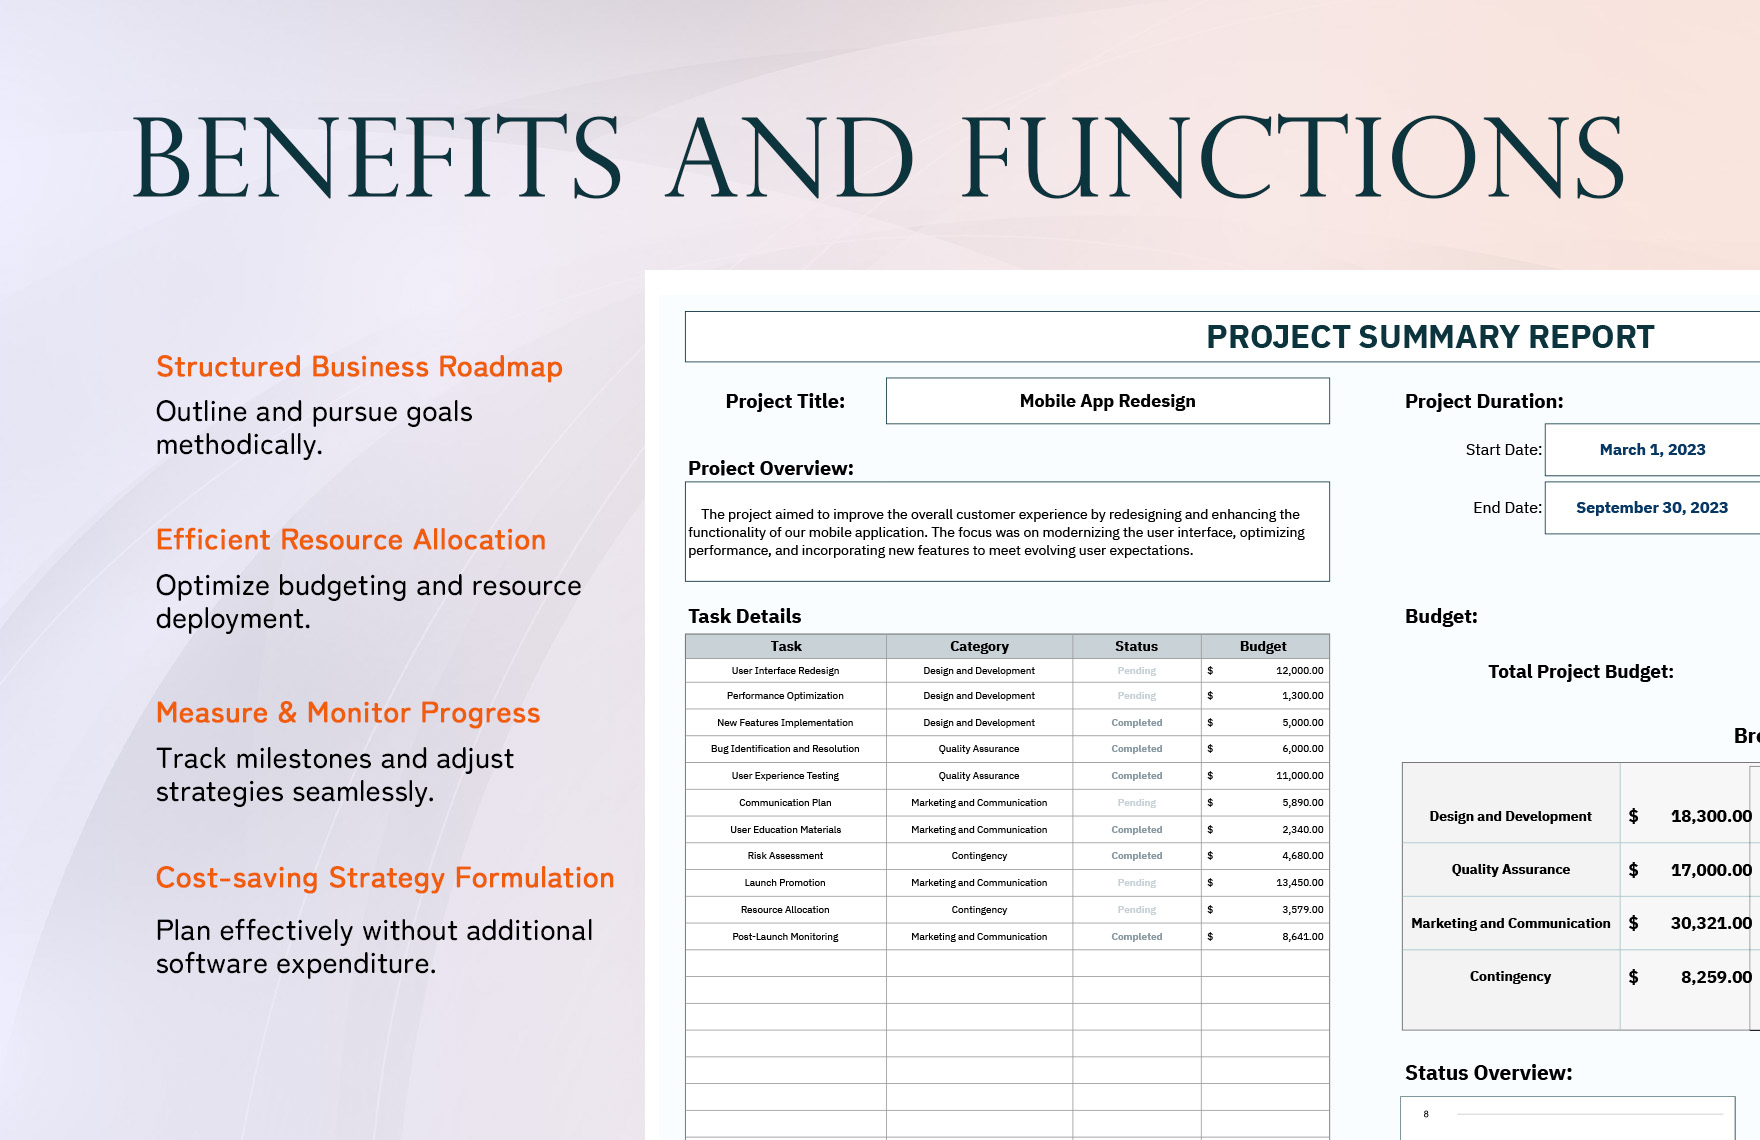 Project Summary Report Template